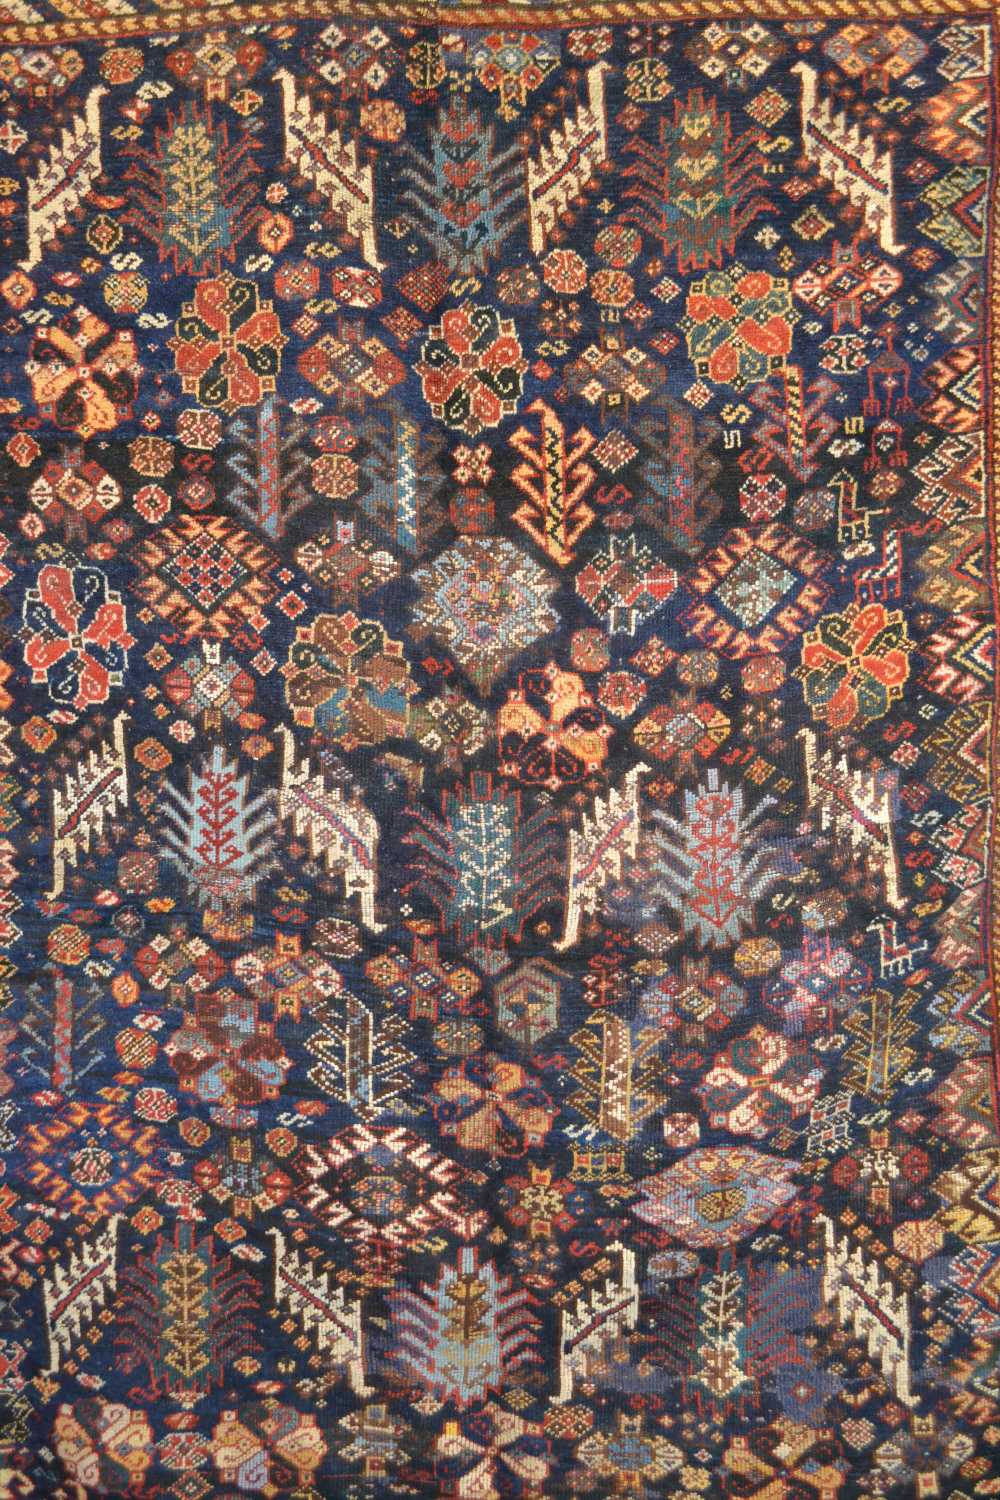 Good Luri rug, Fars, south west Persia, late 19th/early 20th century, 8ft. 5in. x 5ft. 9in. 2.56m. x - Image 2 of 7